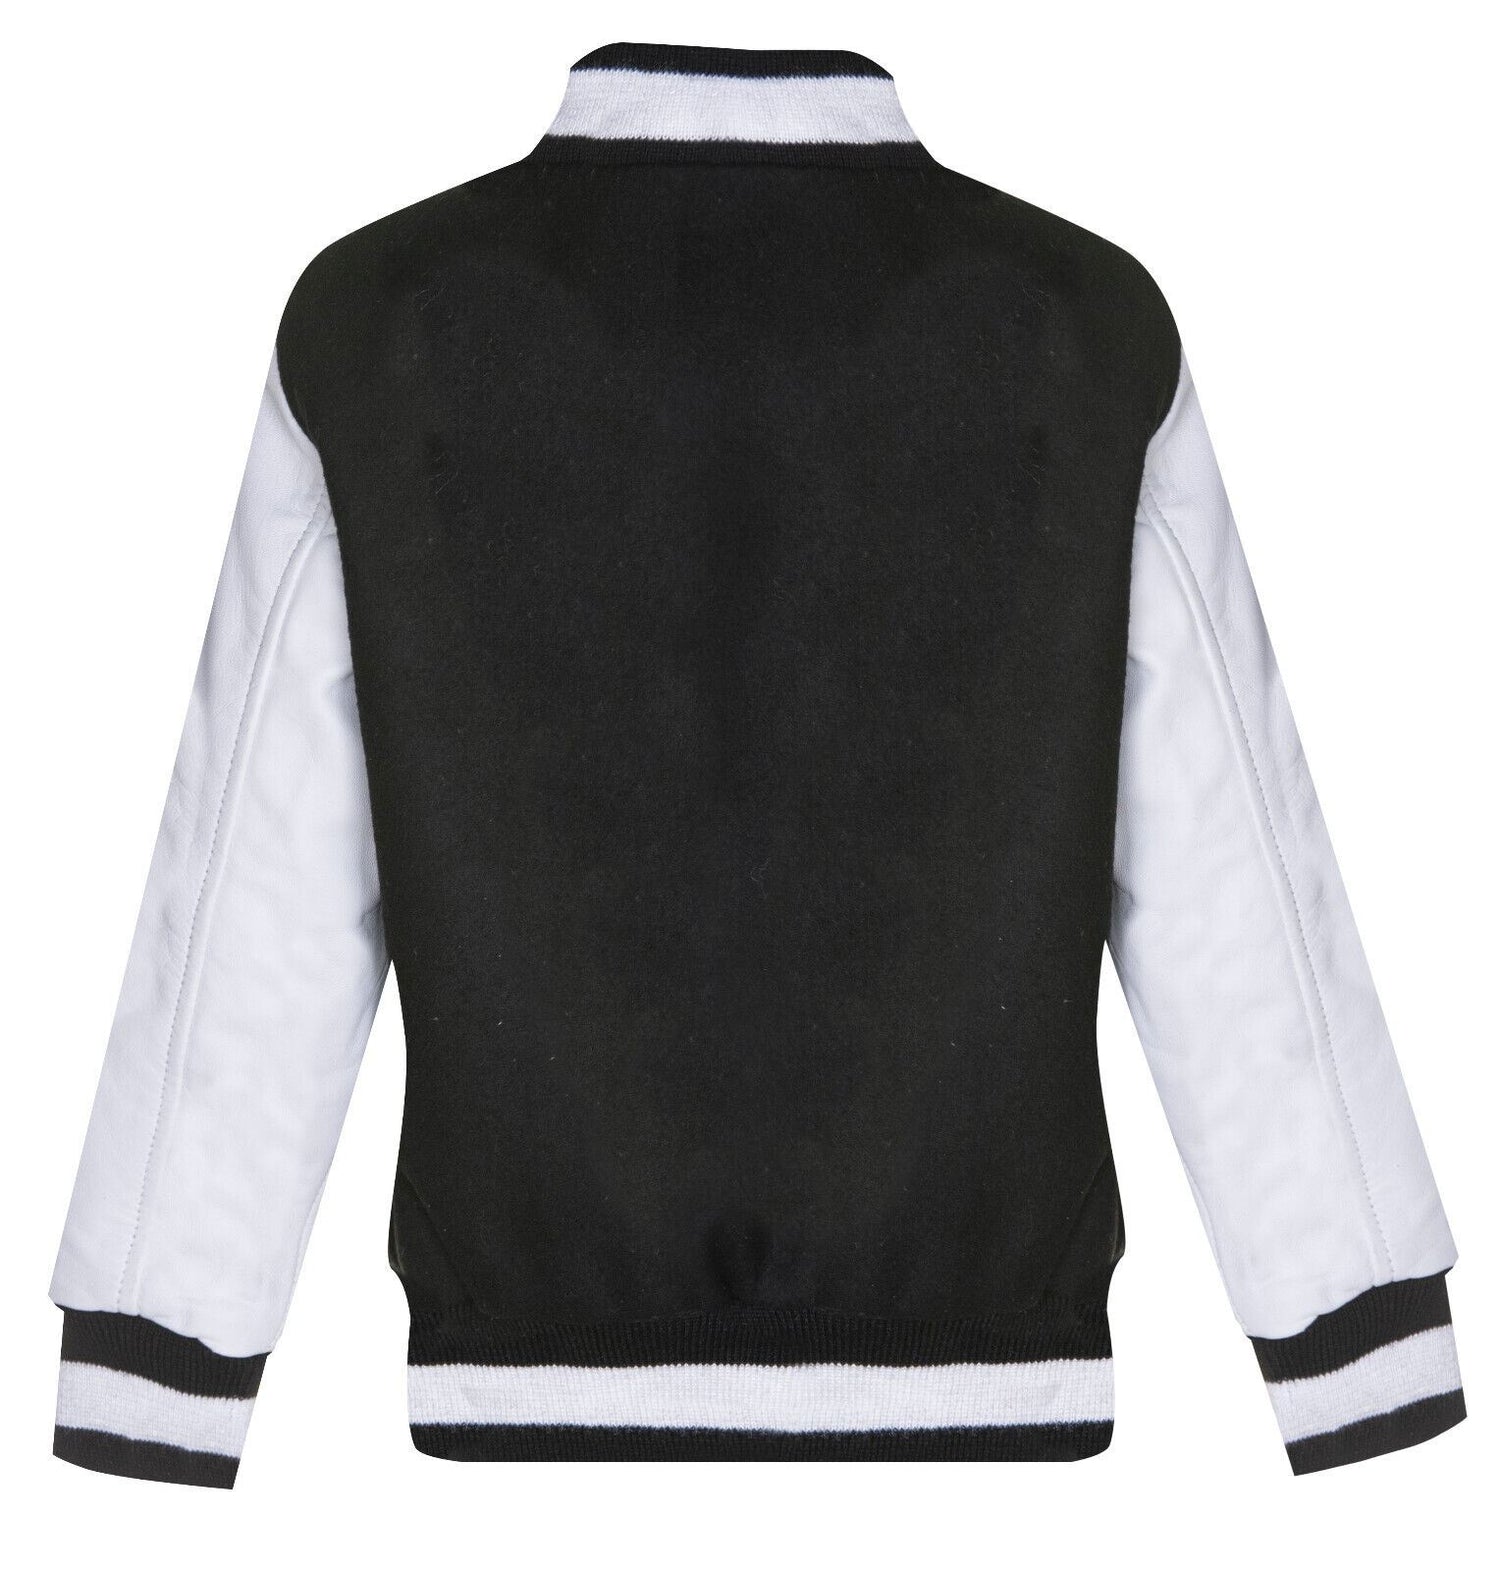 Kids Varsity Bomber Jacket with Real Leather Sleeves 3-13 yrs - Upperclass Fashions 